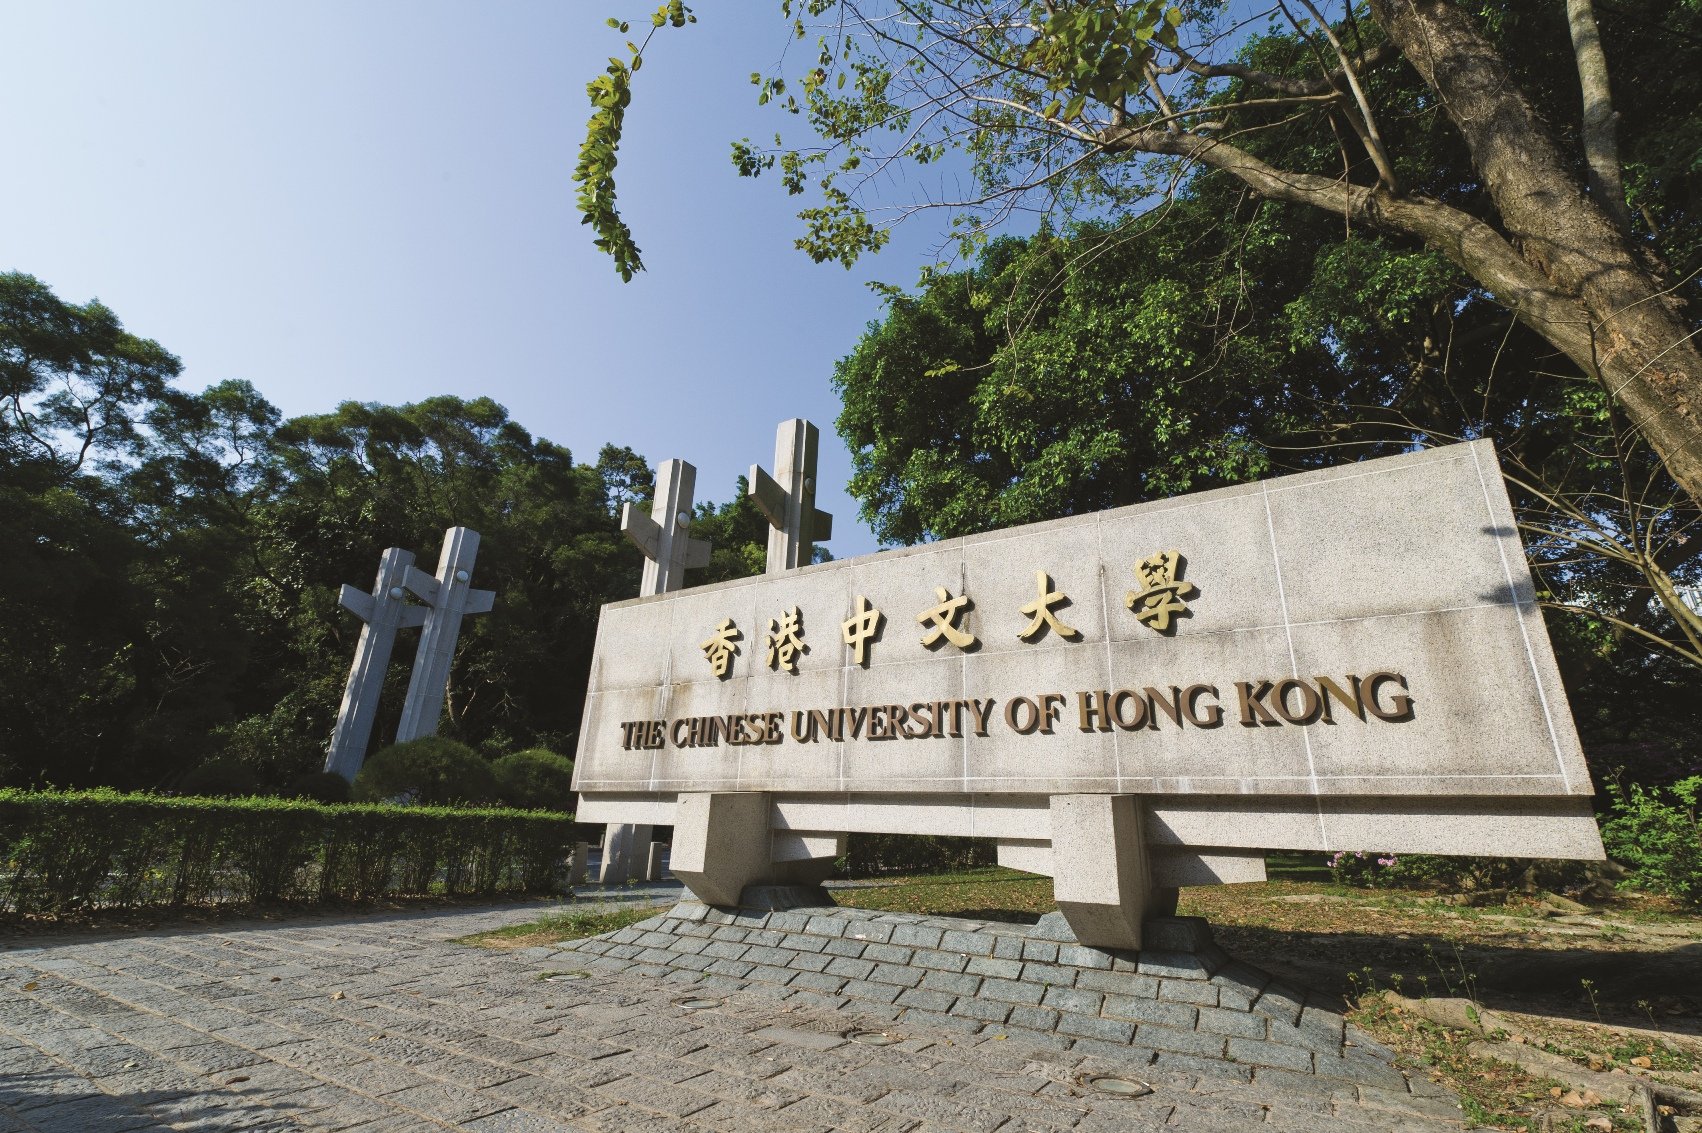 The Chinese University of Hong Kong (CUHK) Asia Research News